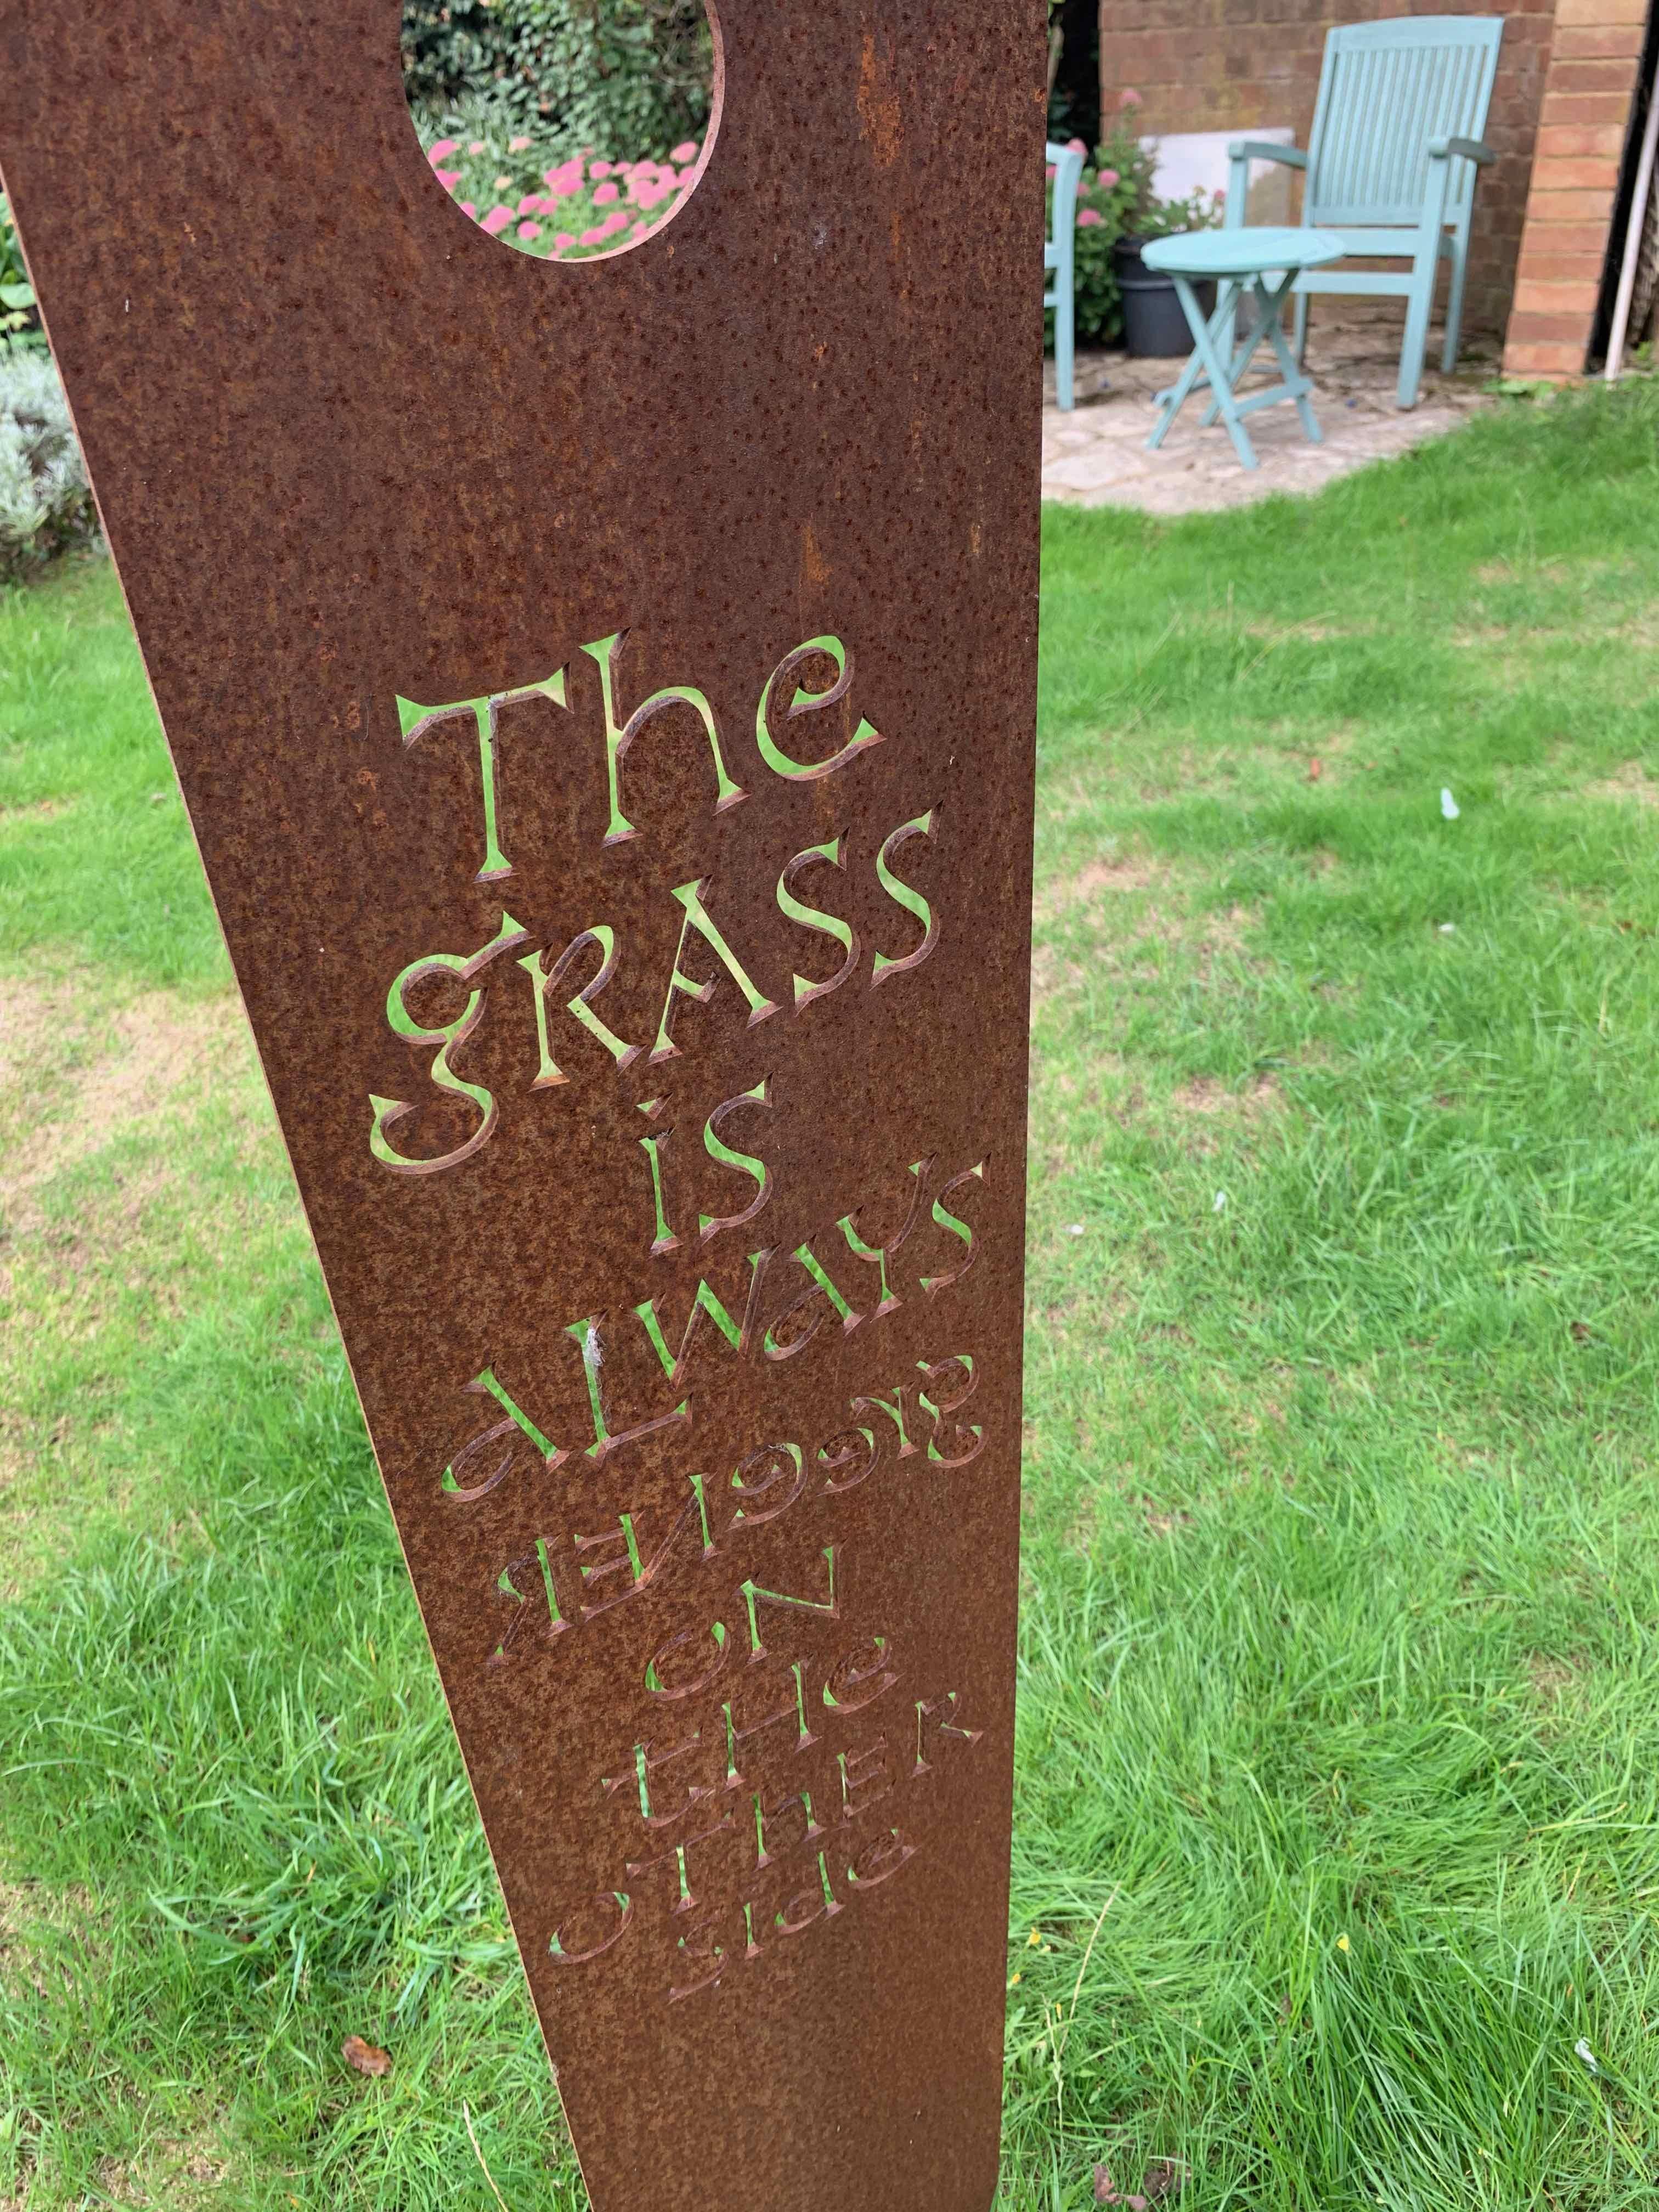 Grass, Editioned, Rusted Corten Steel Garden Sculpture by Annet Stirling For Sale 2